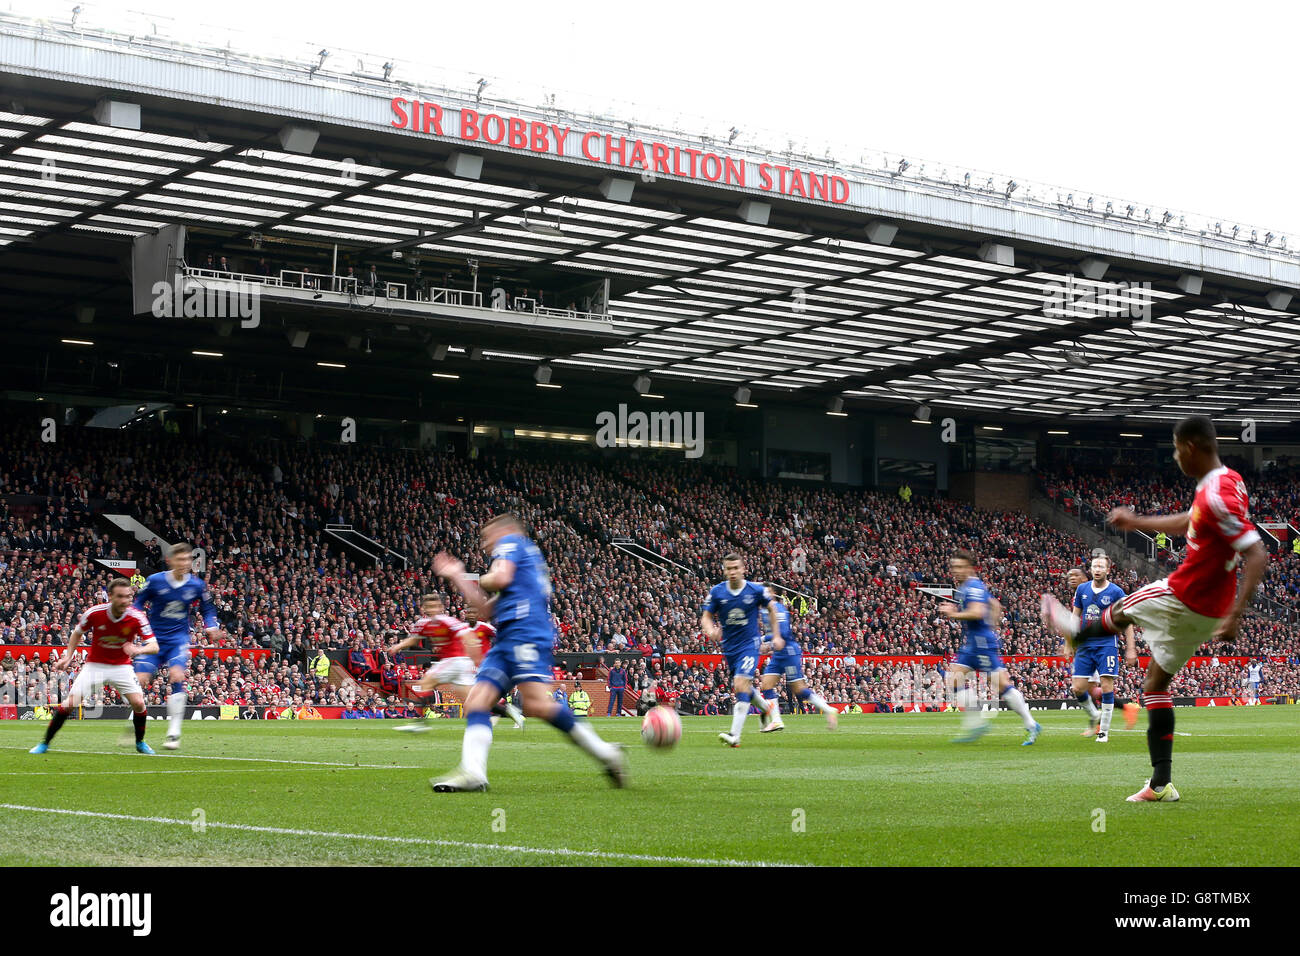 A general view of match action in front of the newly renamed Sir Bobby Charlton Stand during the Barclays Premier League match at Old Trafford, Manchester. Stock Photo